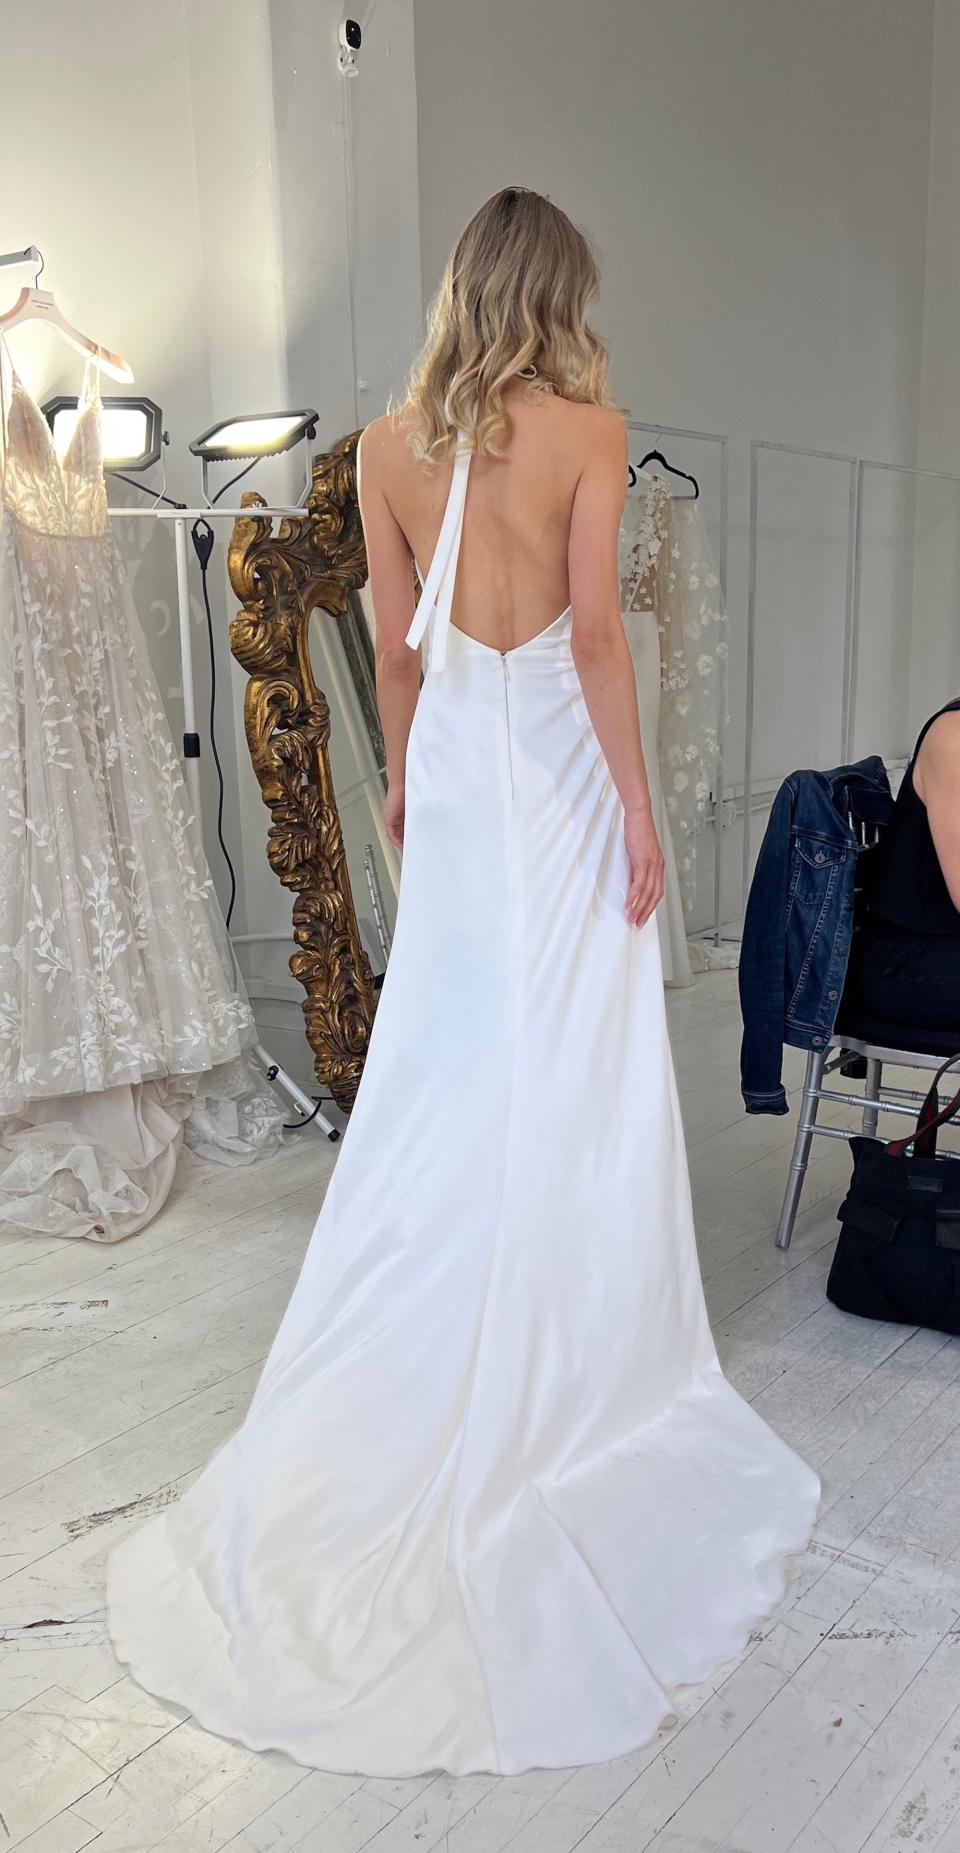 A woman walks through a room, showing off her backless wedding dress.